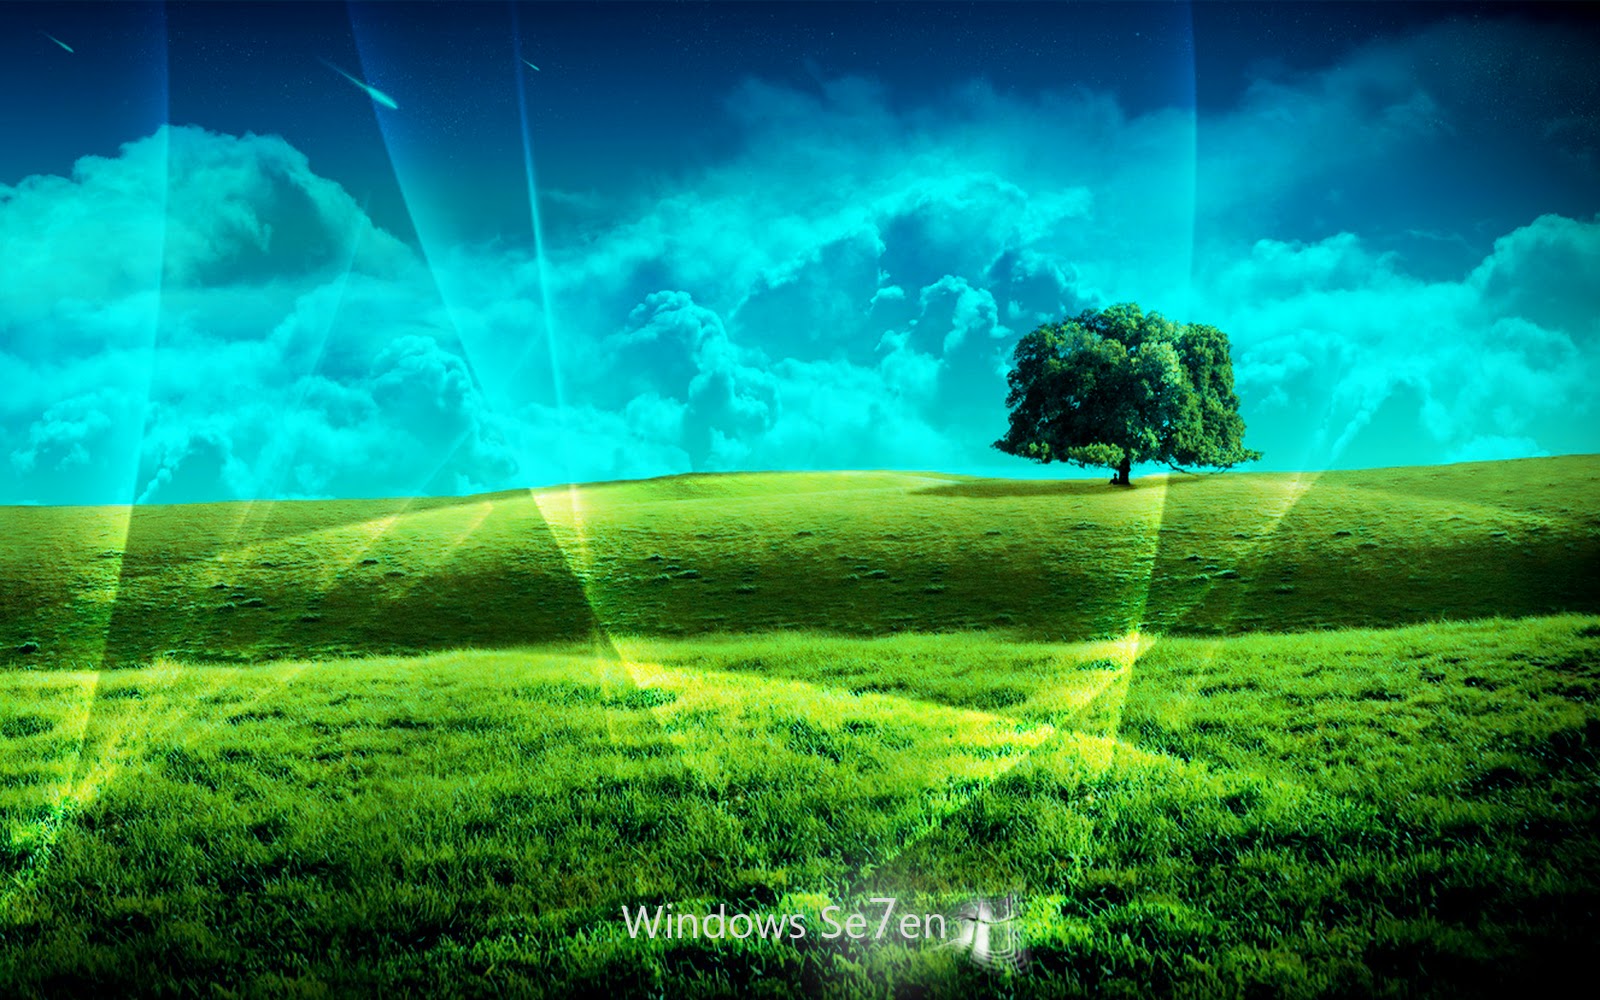 windows 7 wallpaper with hd for desktop backgrounds